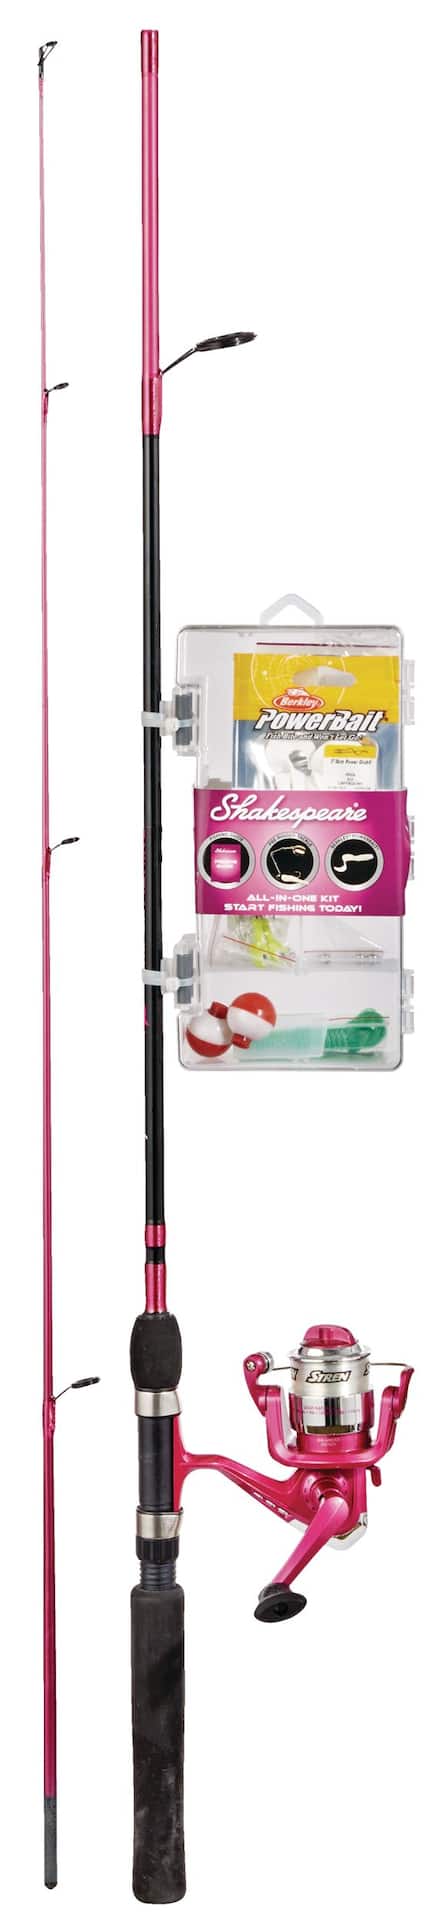 Simply Fishing Ladies Spinning Fishing Rod and Reel Combo with